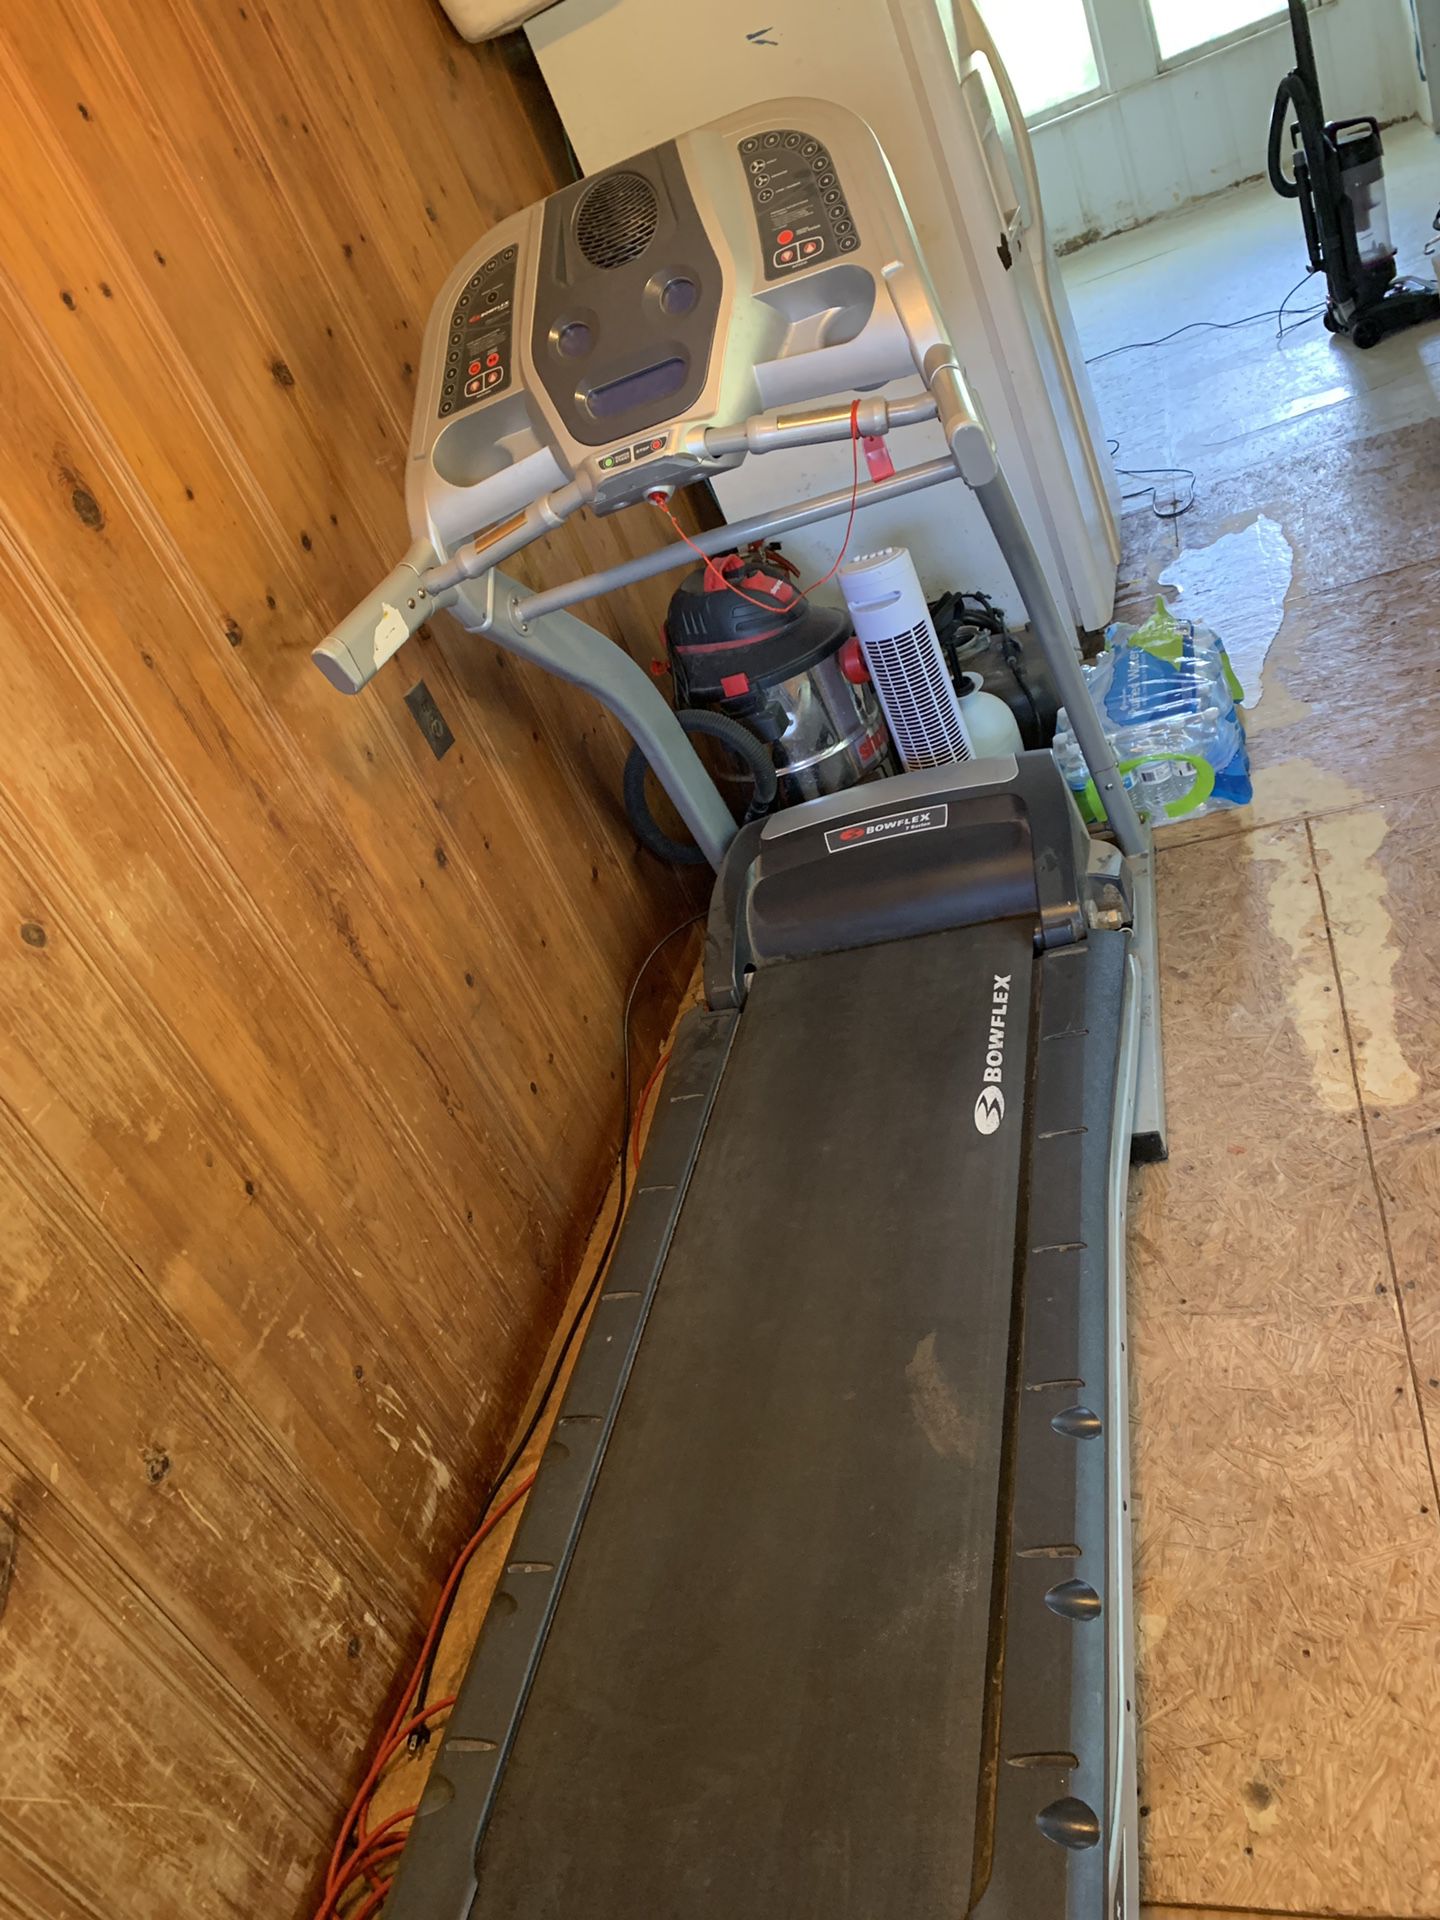 Free treadmill. Just come pick it up